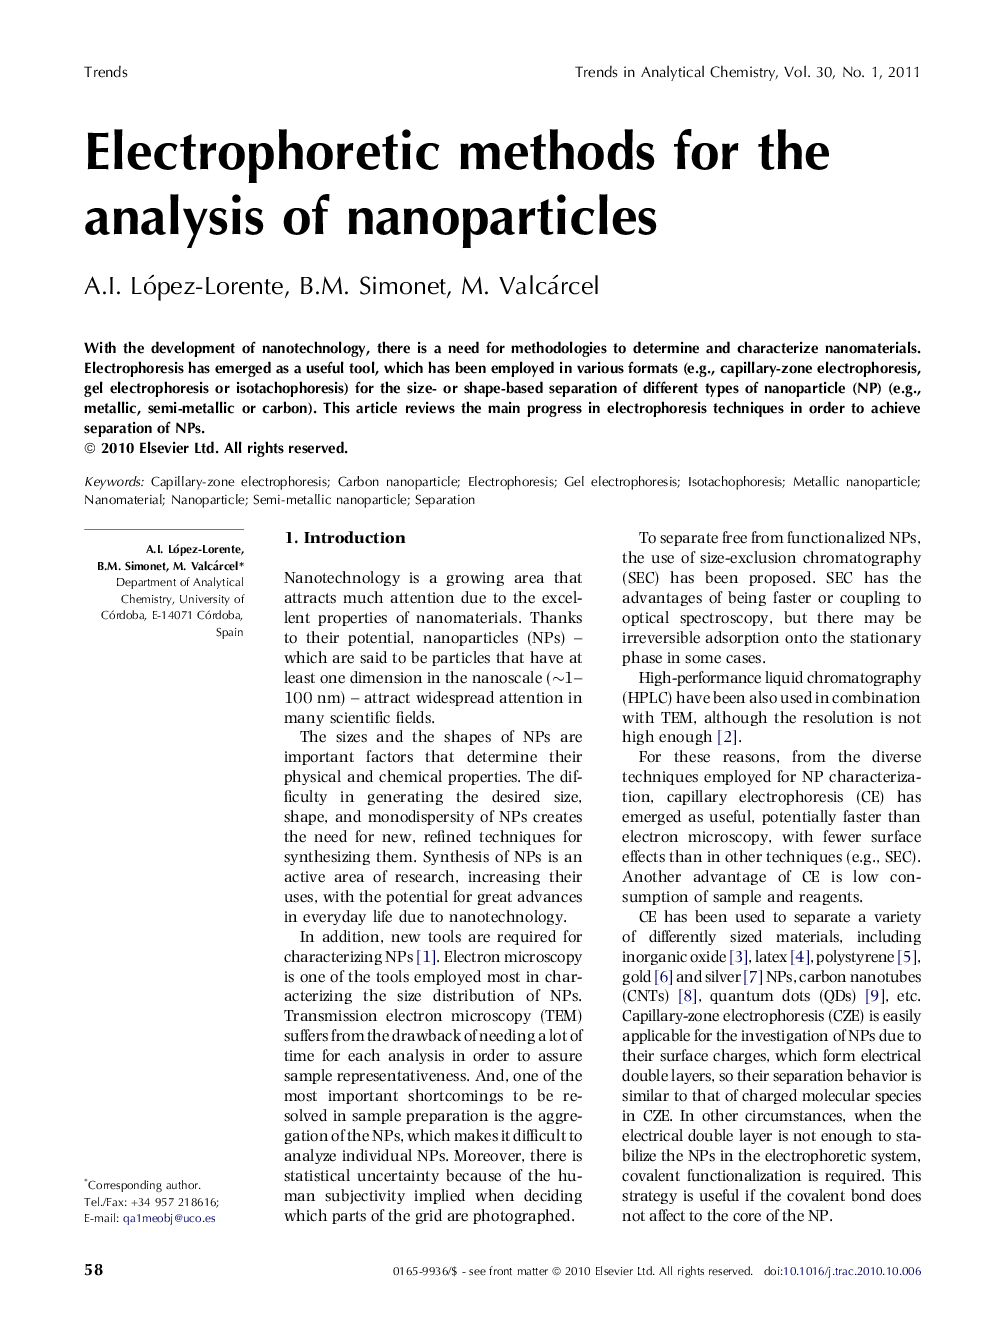 Electrophoretic methods for the analysis of nanoparticles